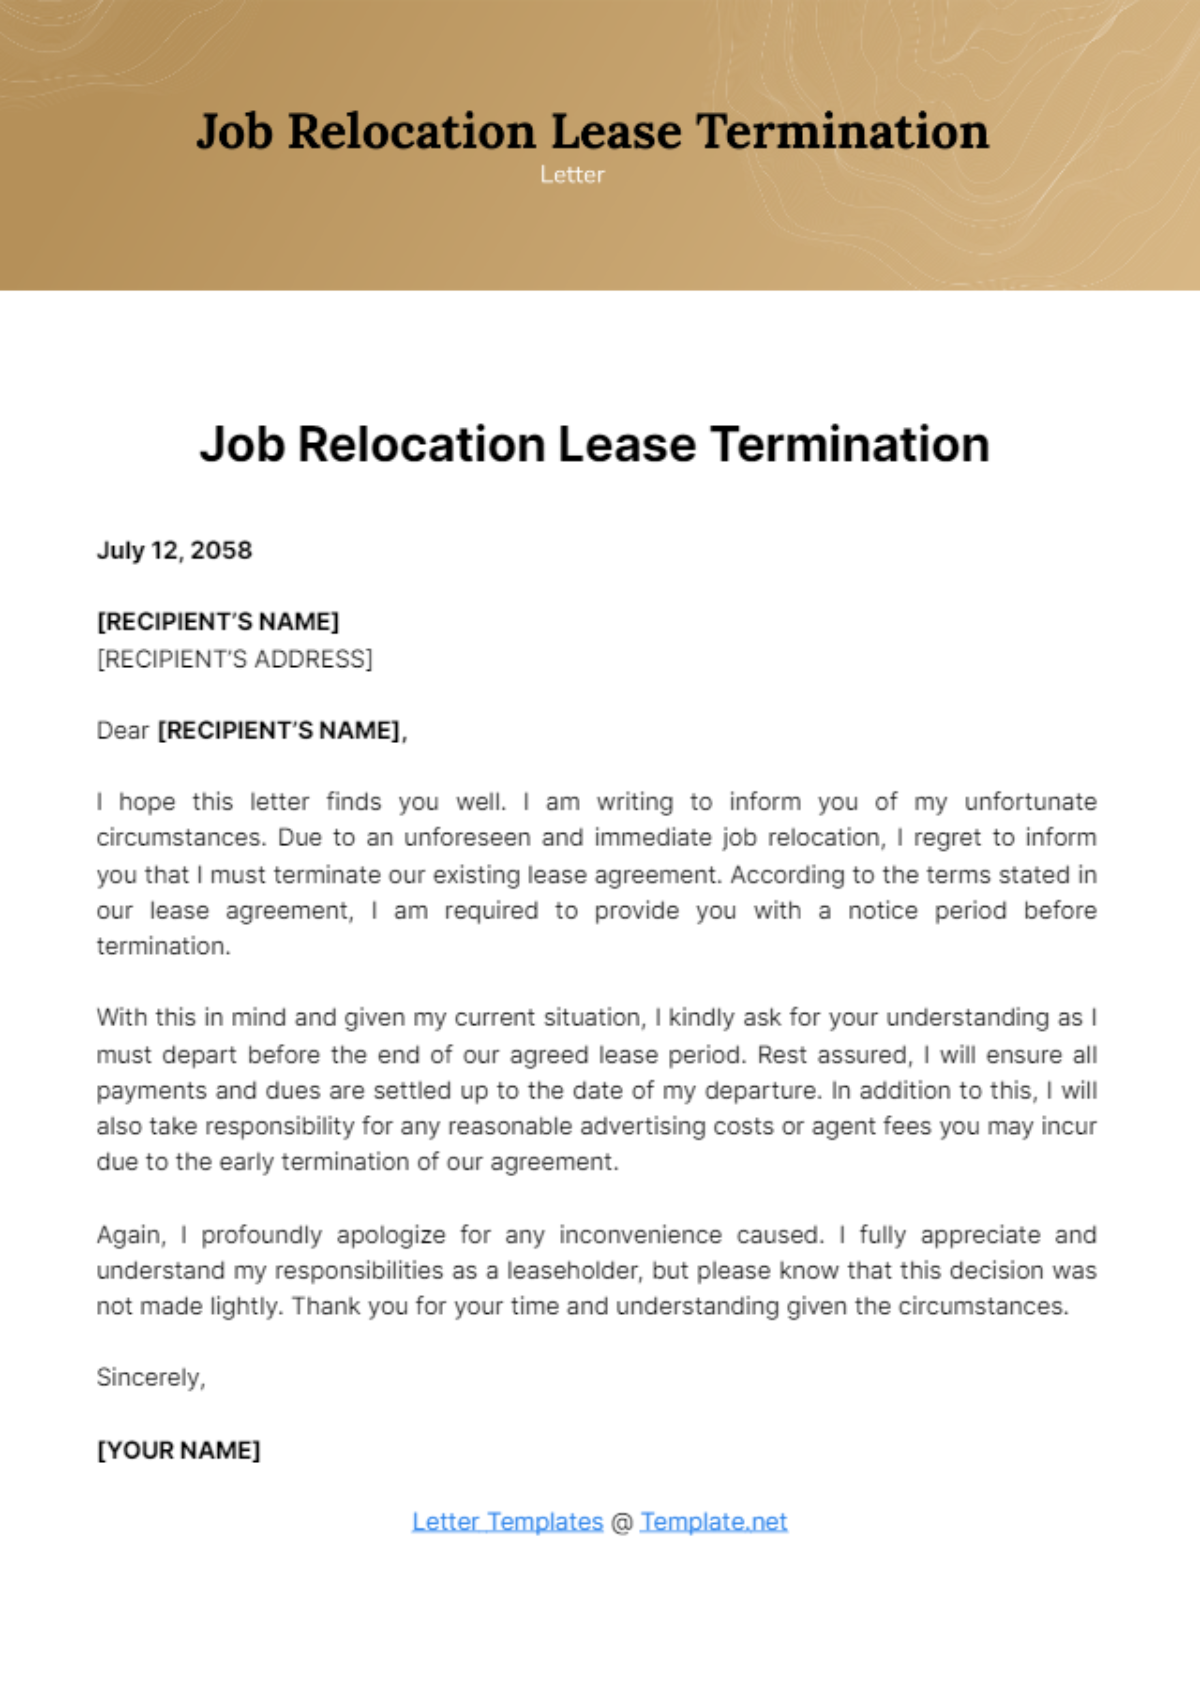 Free Job Relocation Lease Termination Letter Template